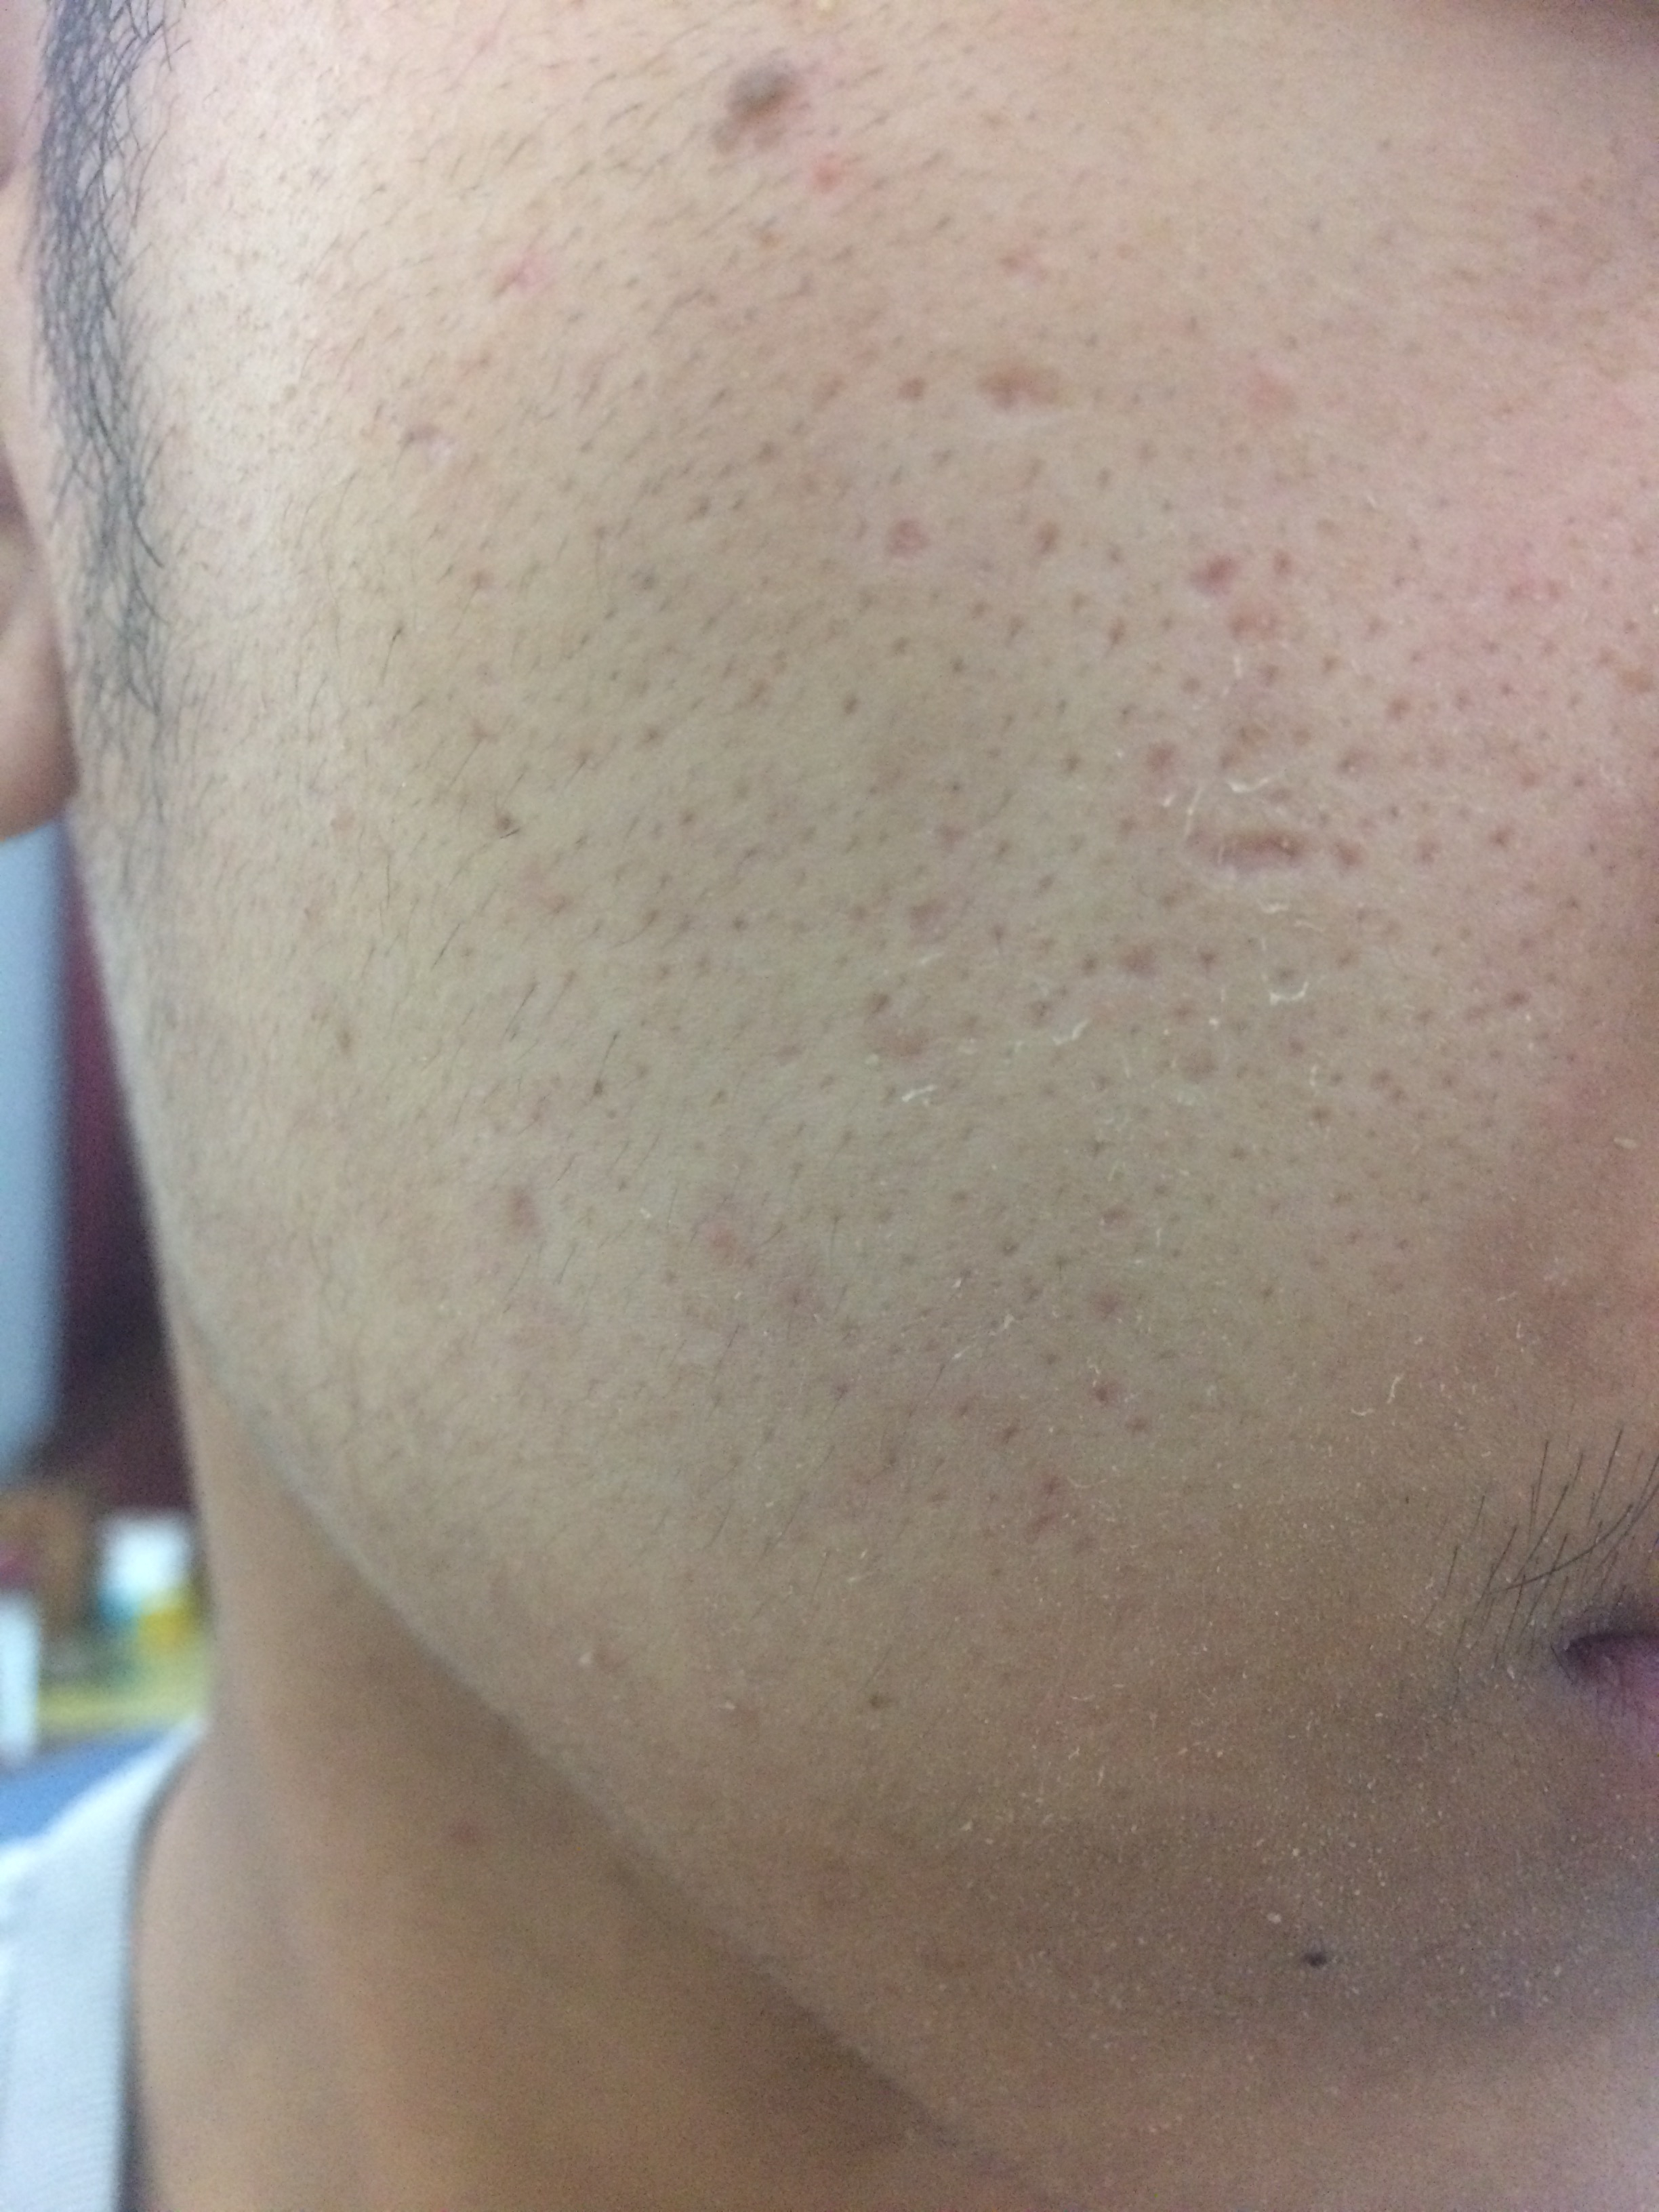 Is this pores or scars?And how to treat it picture include - Scar